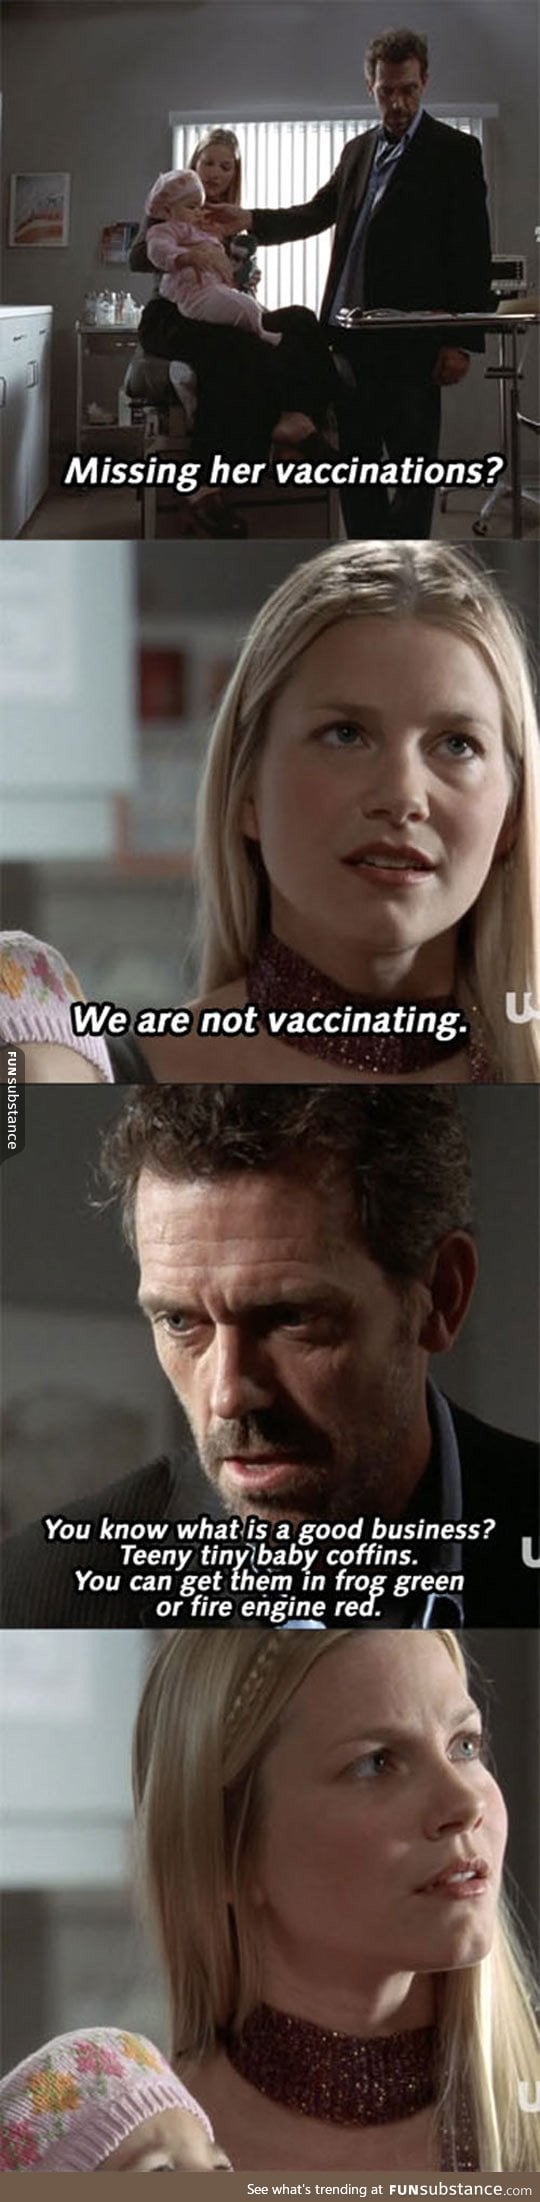 We are not vaccinating